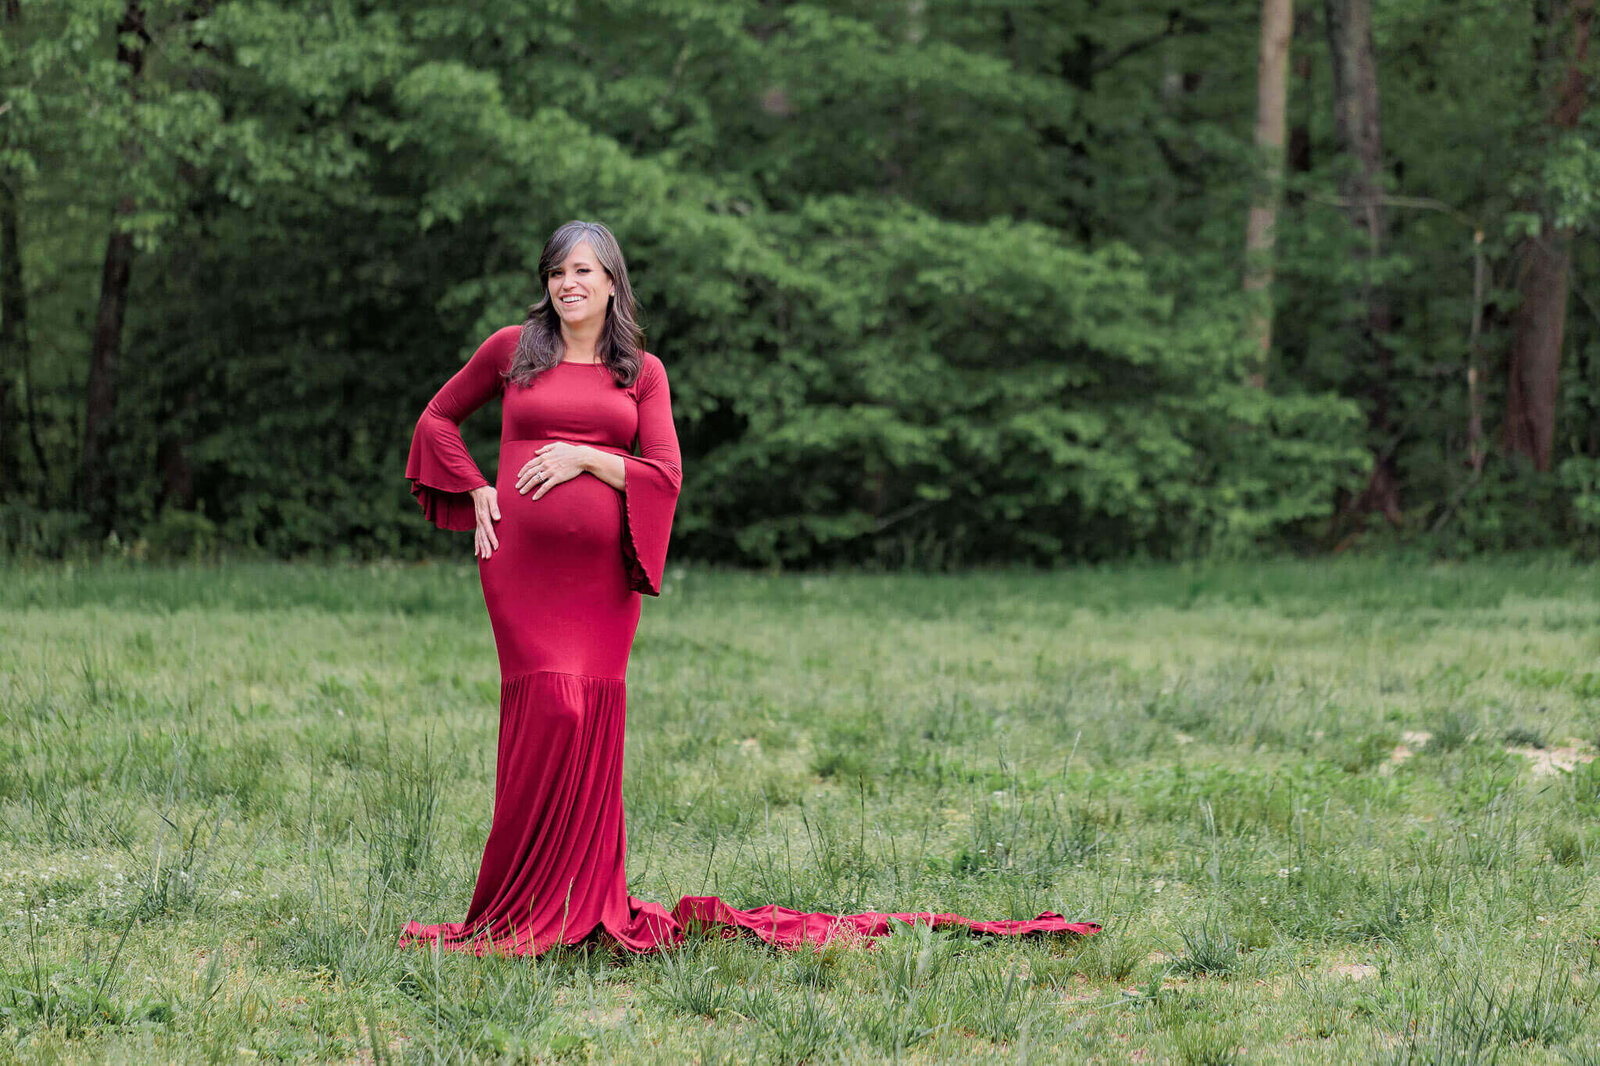 An outdoor Burke, VA maternity portrait session of a woman in a red dress.